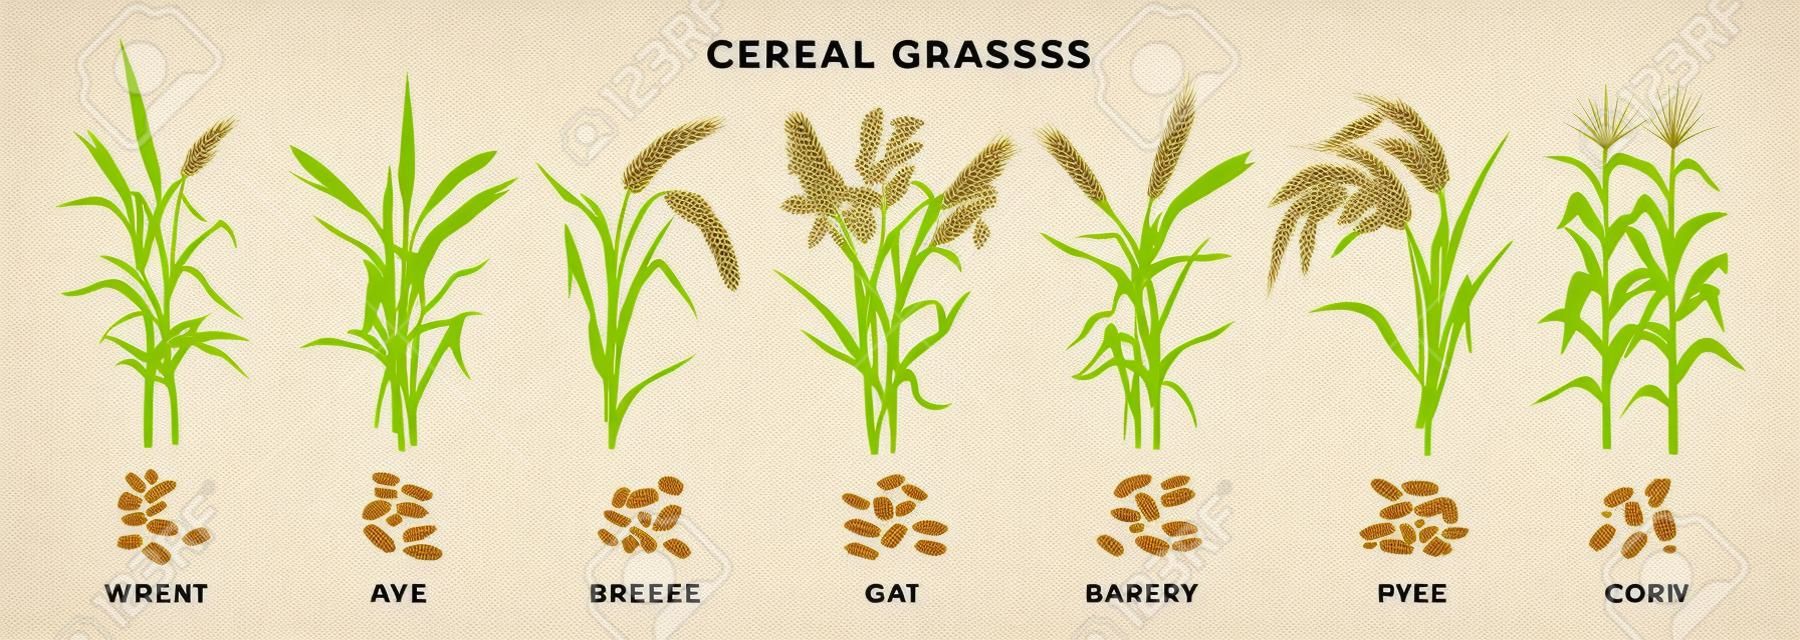 Cereal grasses big collection of plants and seeds, botanical drawings in flat design isolated on white background. Cereals - wheat, rye, oat, millet, barley, maize, rice planting infographic elements.